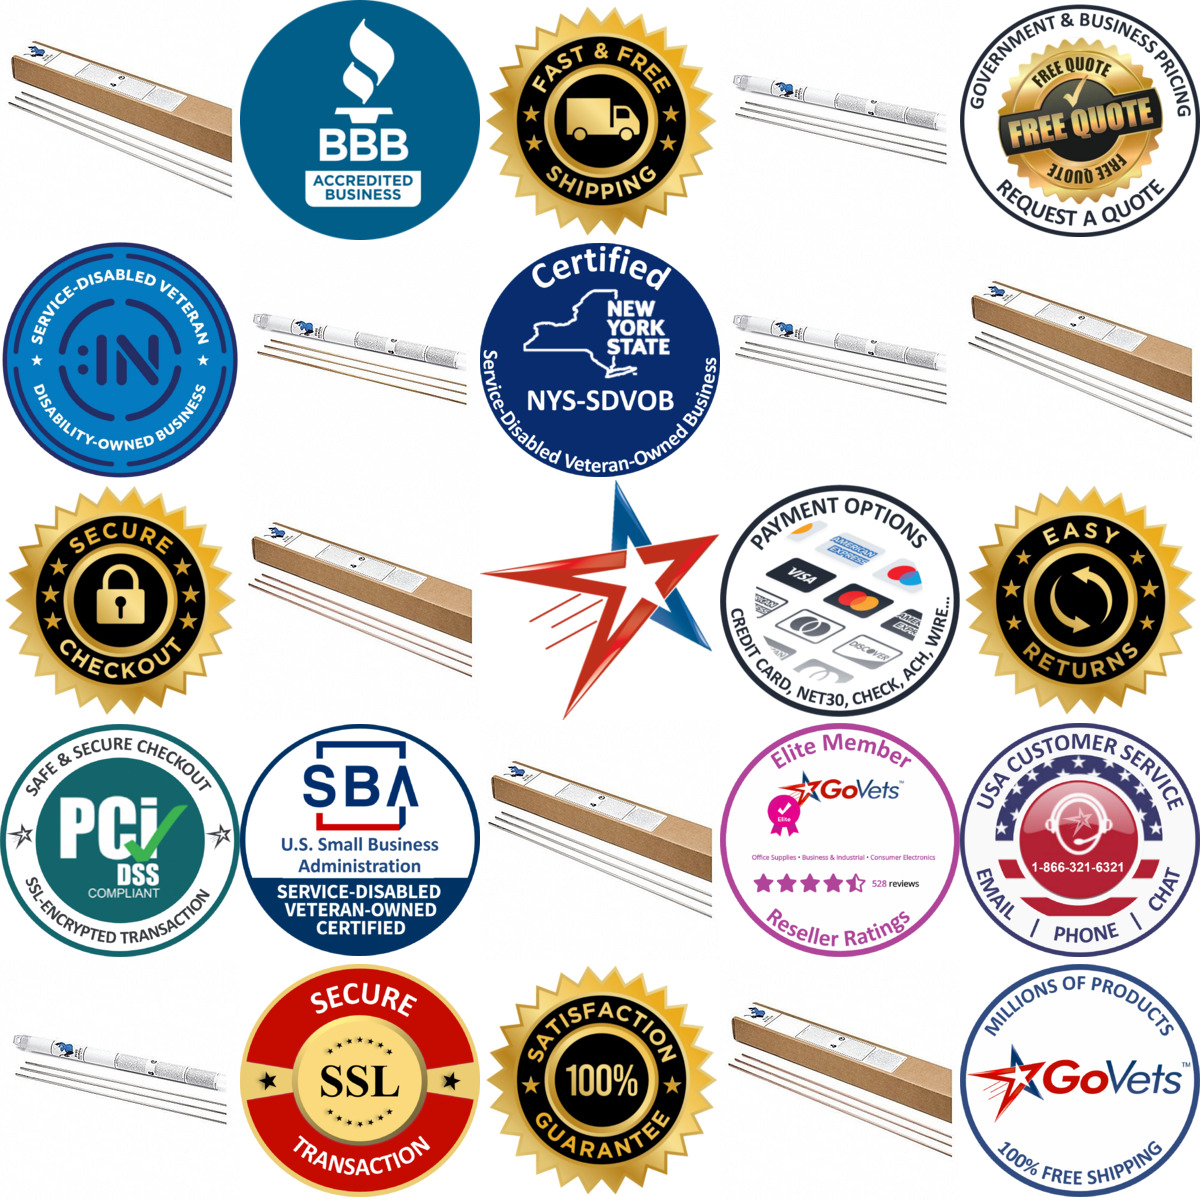 A selection of Thermoplastic Welding Rods products on GoVets